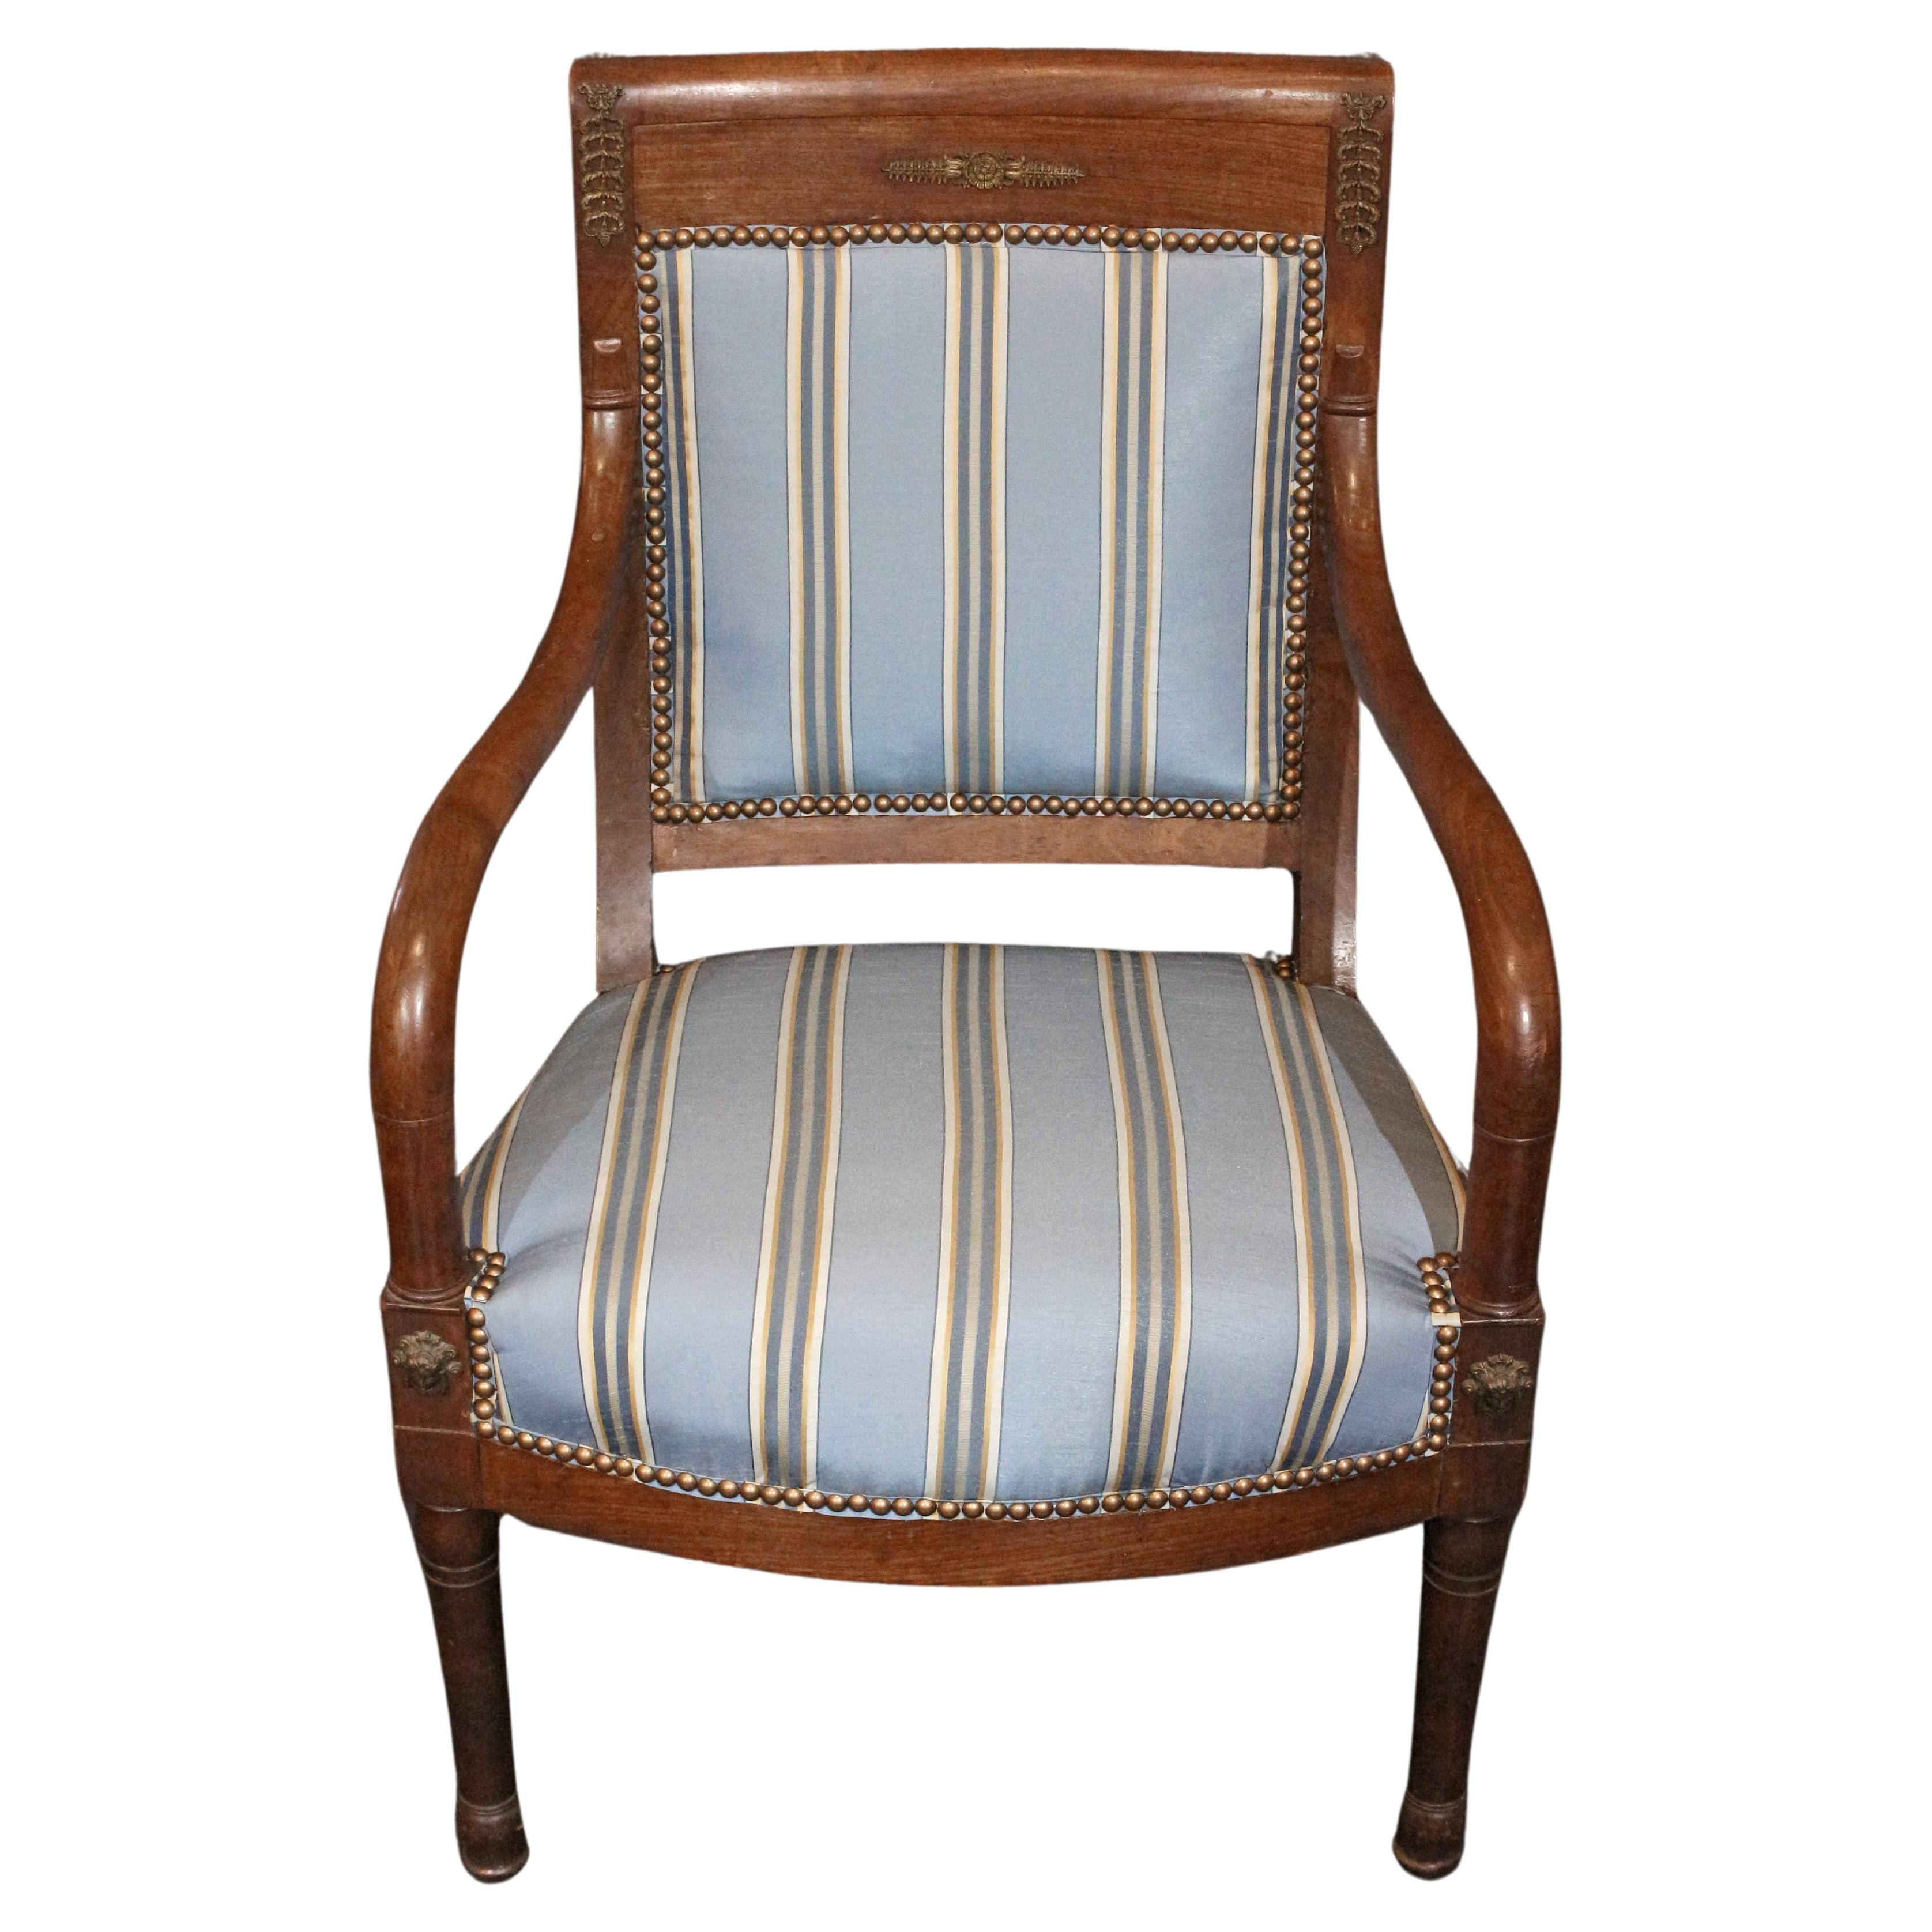 Circa 1800-1815 French Directoire to Empire Period Fauteuil